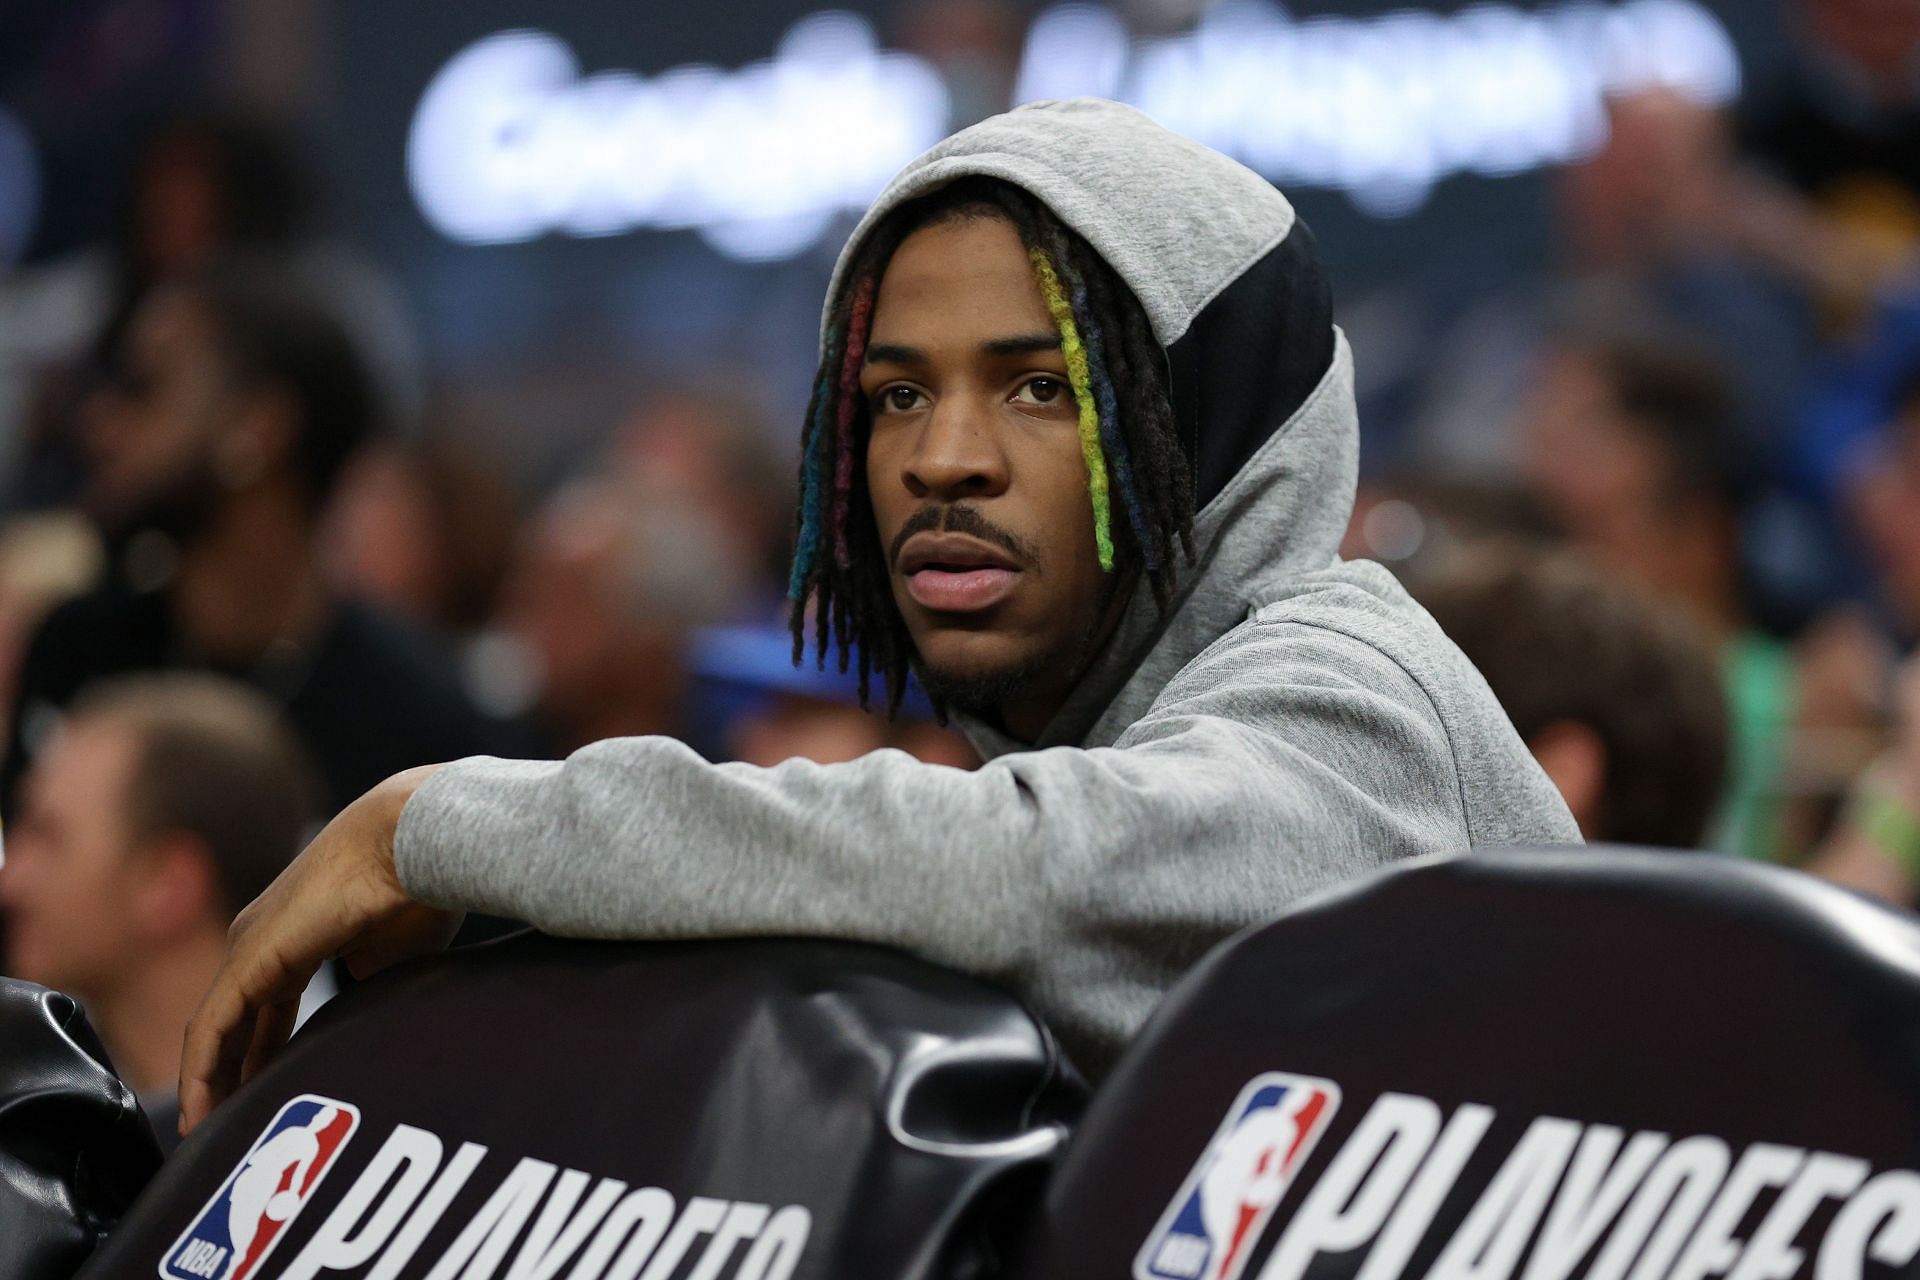 Memphis Grizzlies vs. Golden State Warriors, Game 4: Ja Morant sidelined due to injury